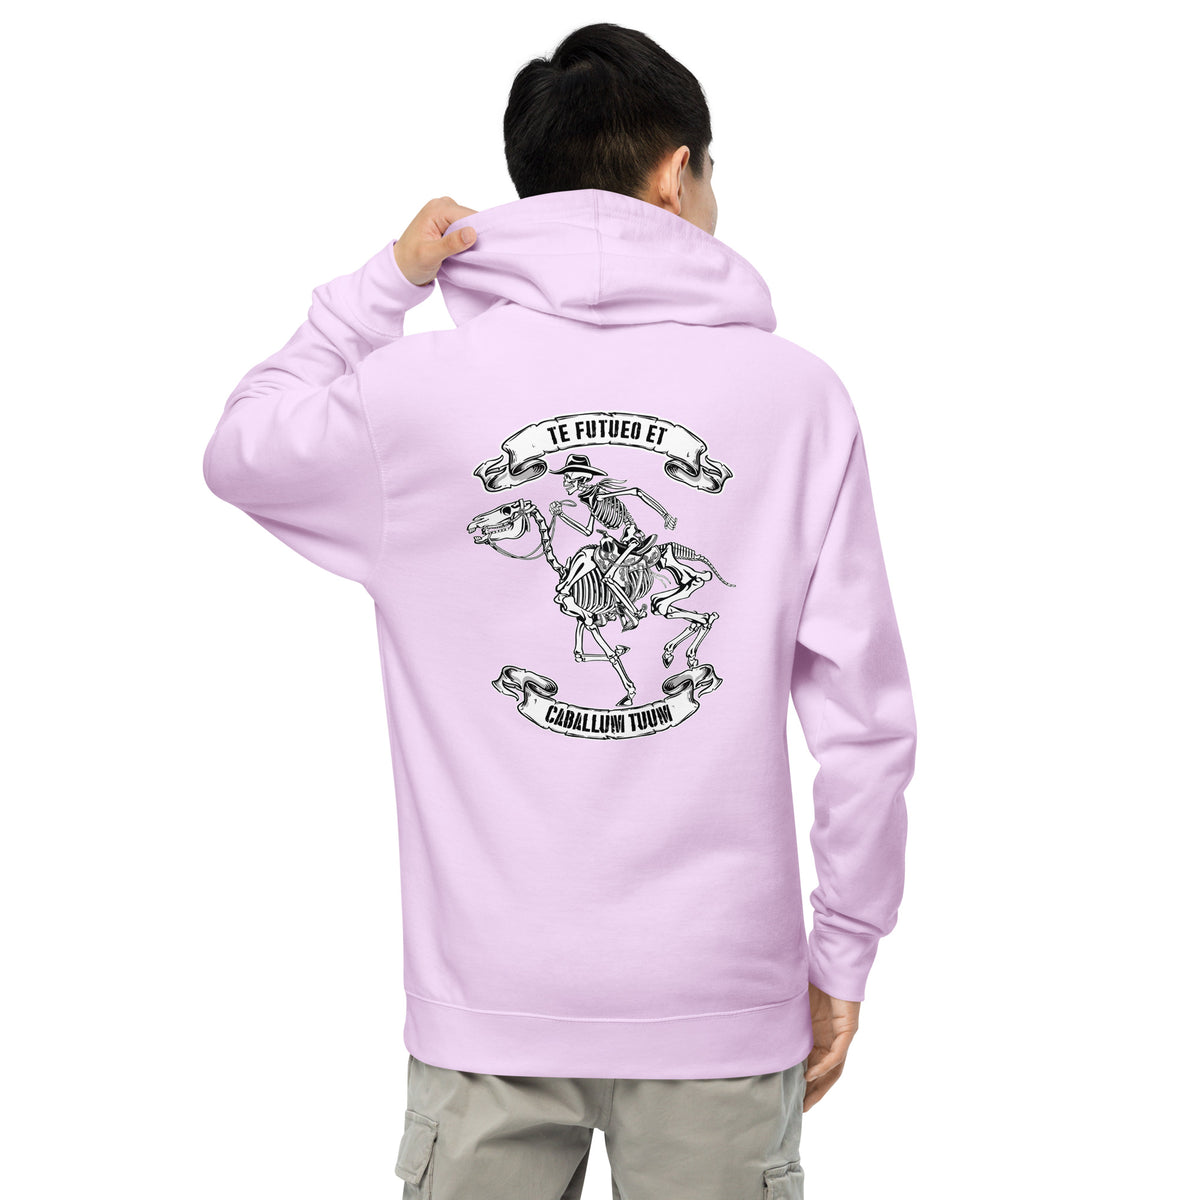 Te futueo et caballum tuum (Latin-F@*k You And The Horse You Rode In On) Unisex midweight hoodie